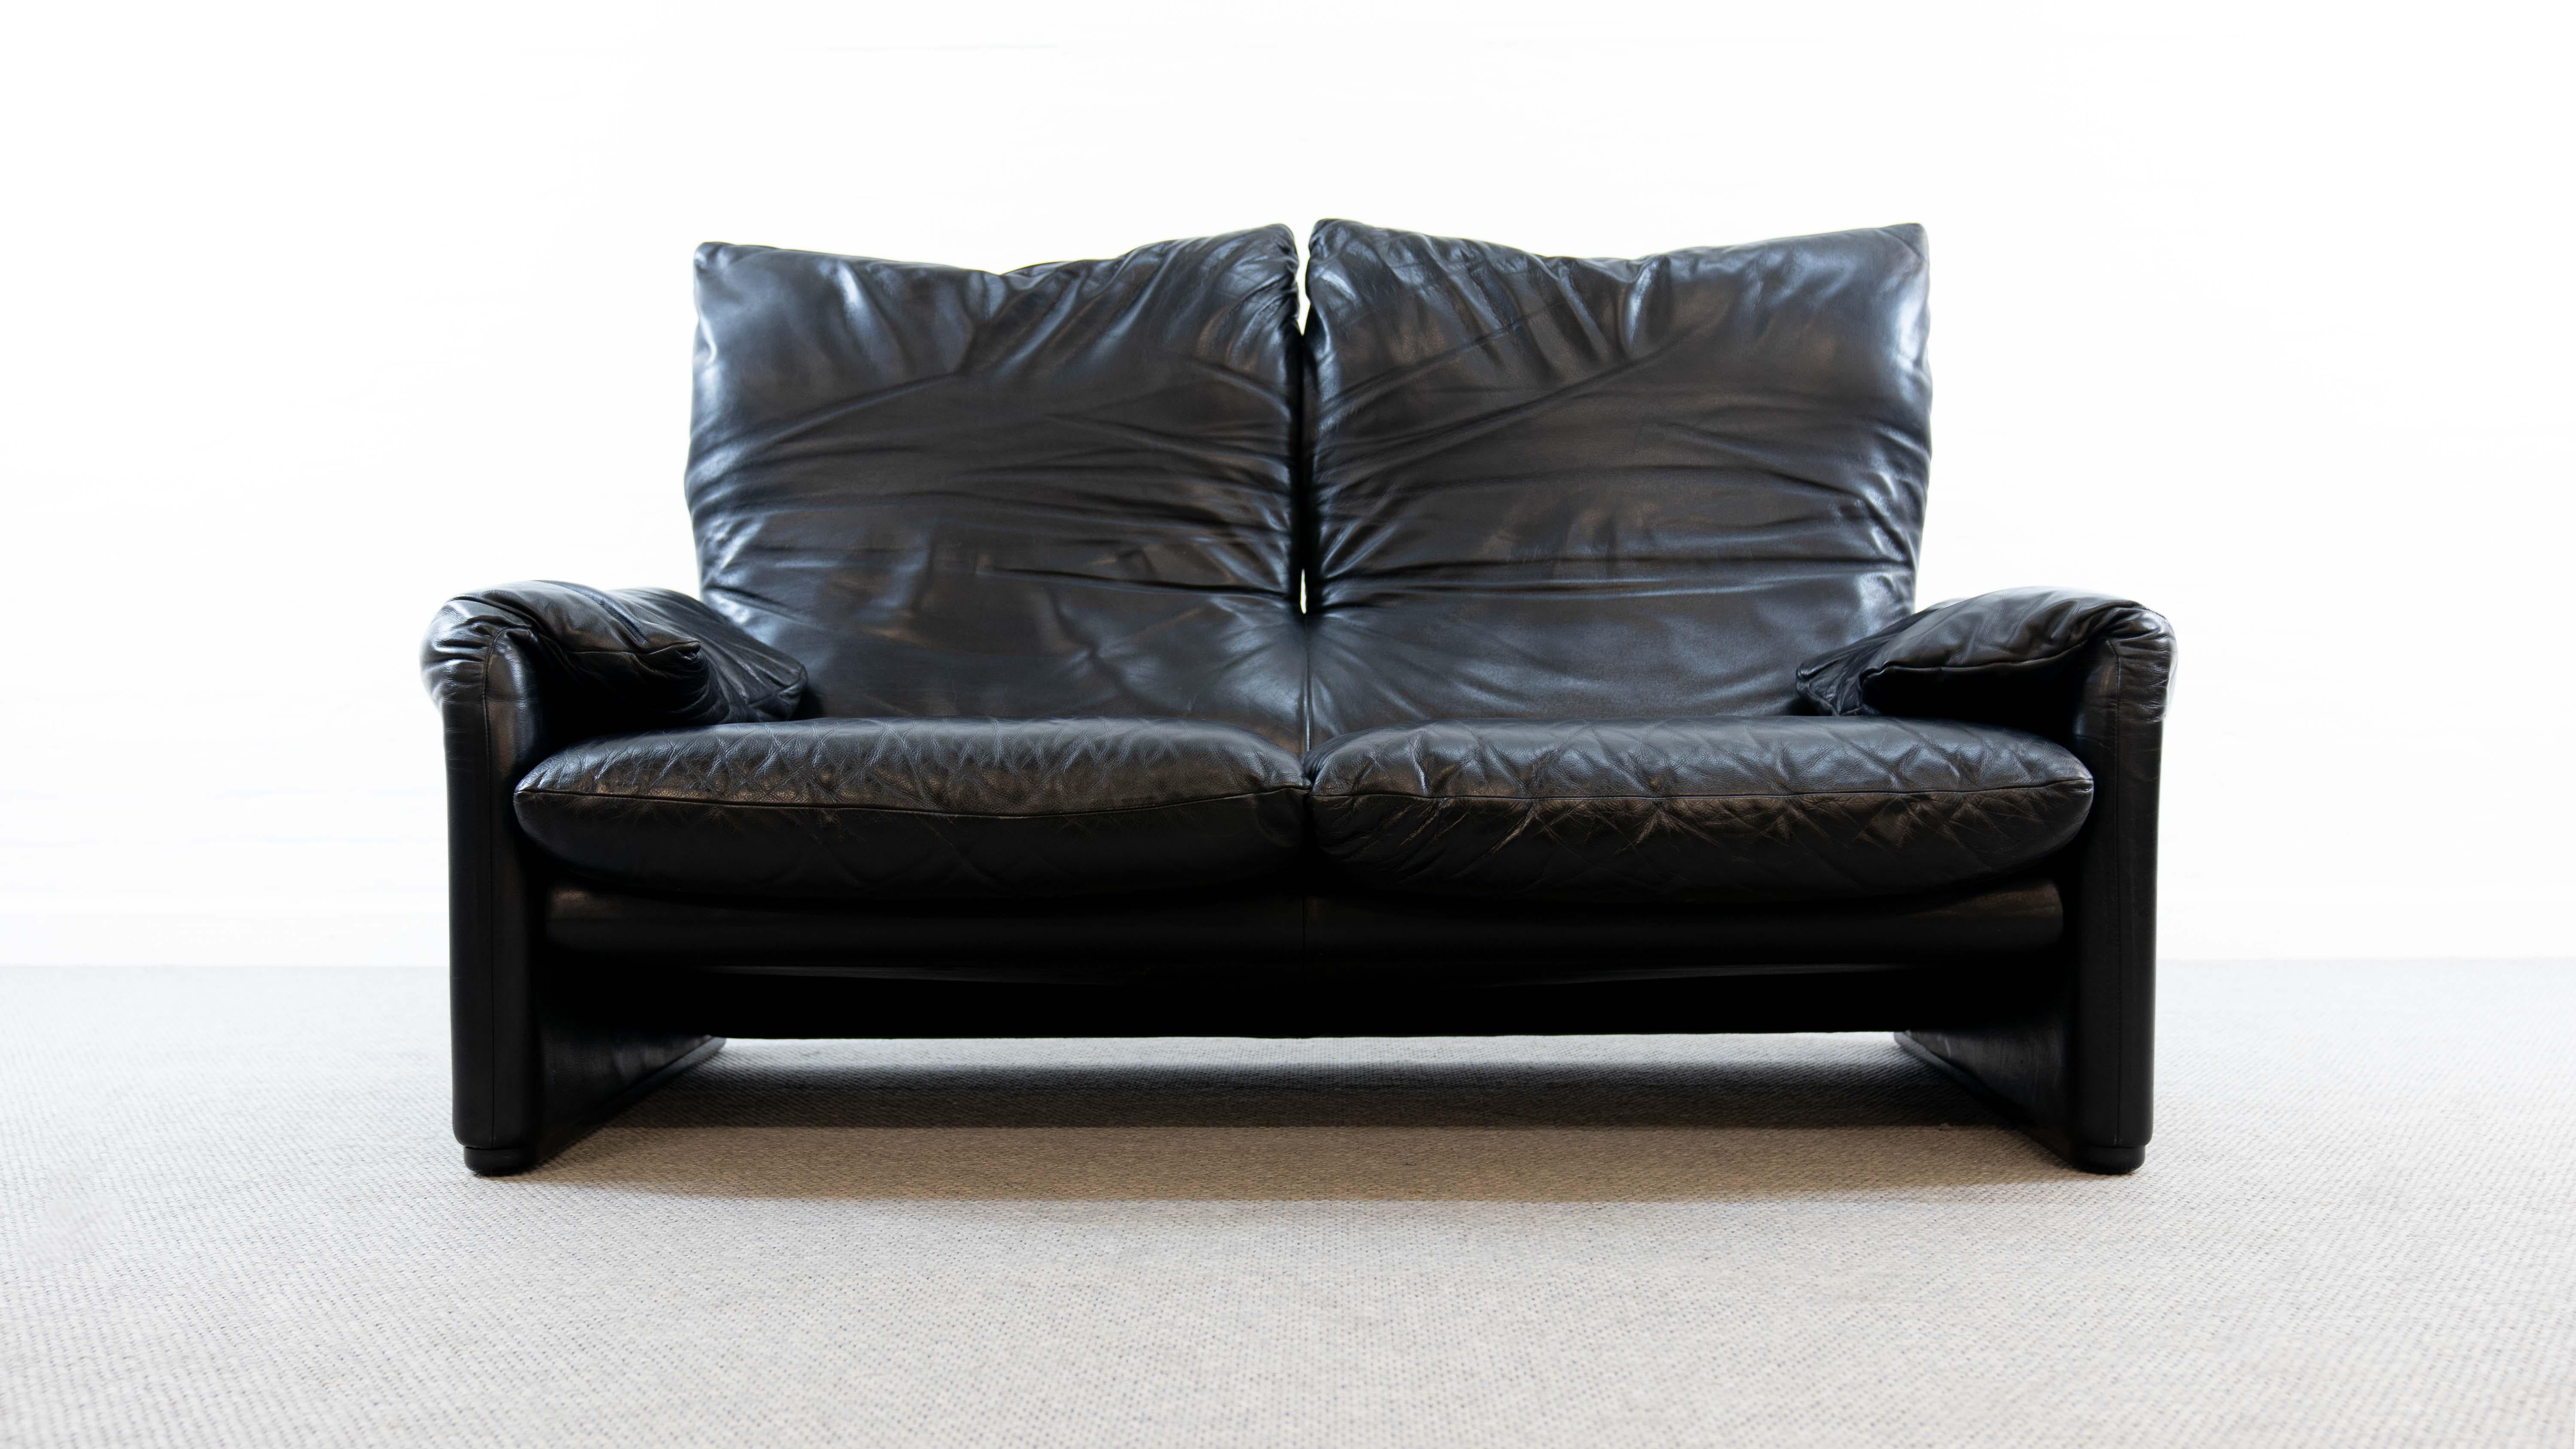 Mid-Century Modern Maralunga 2-Seat Sofa in Black Leather by Vico Magistretti for Cassina, Italy